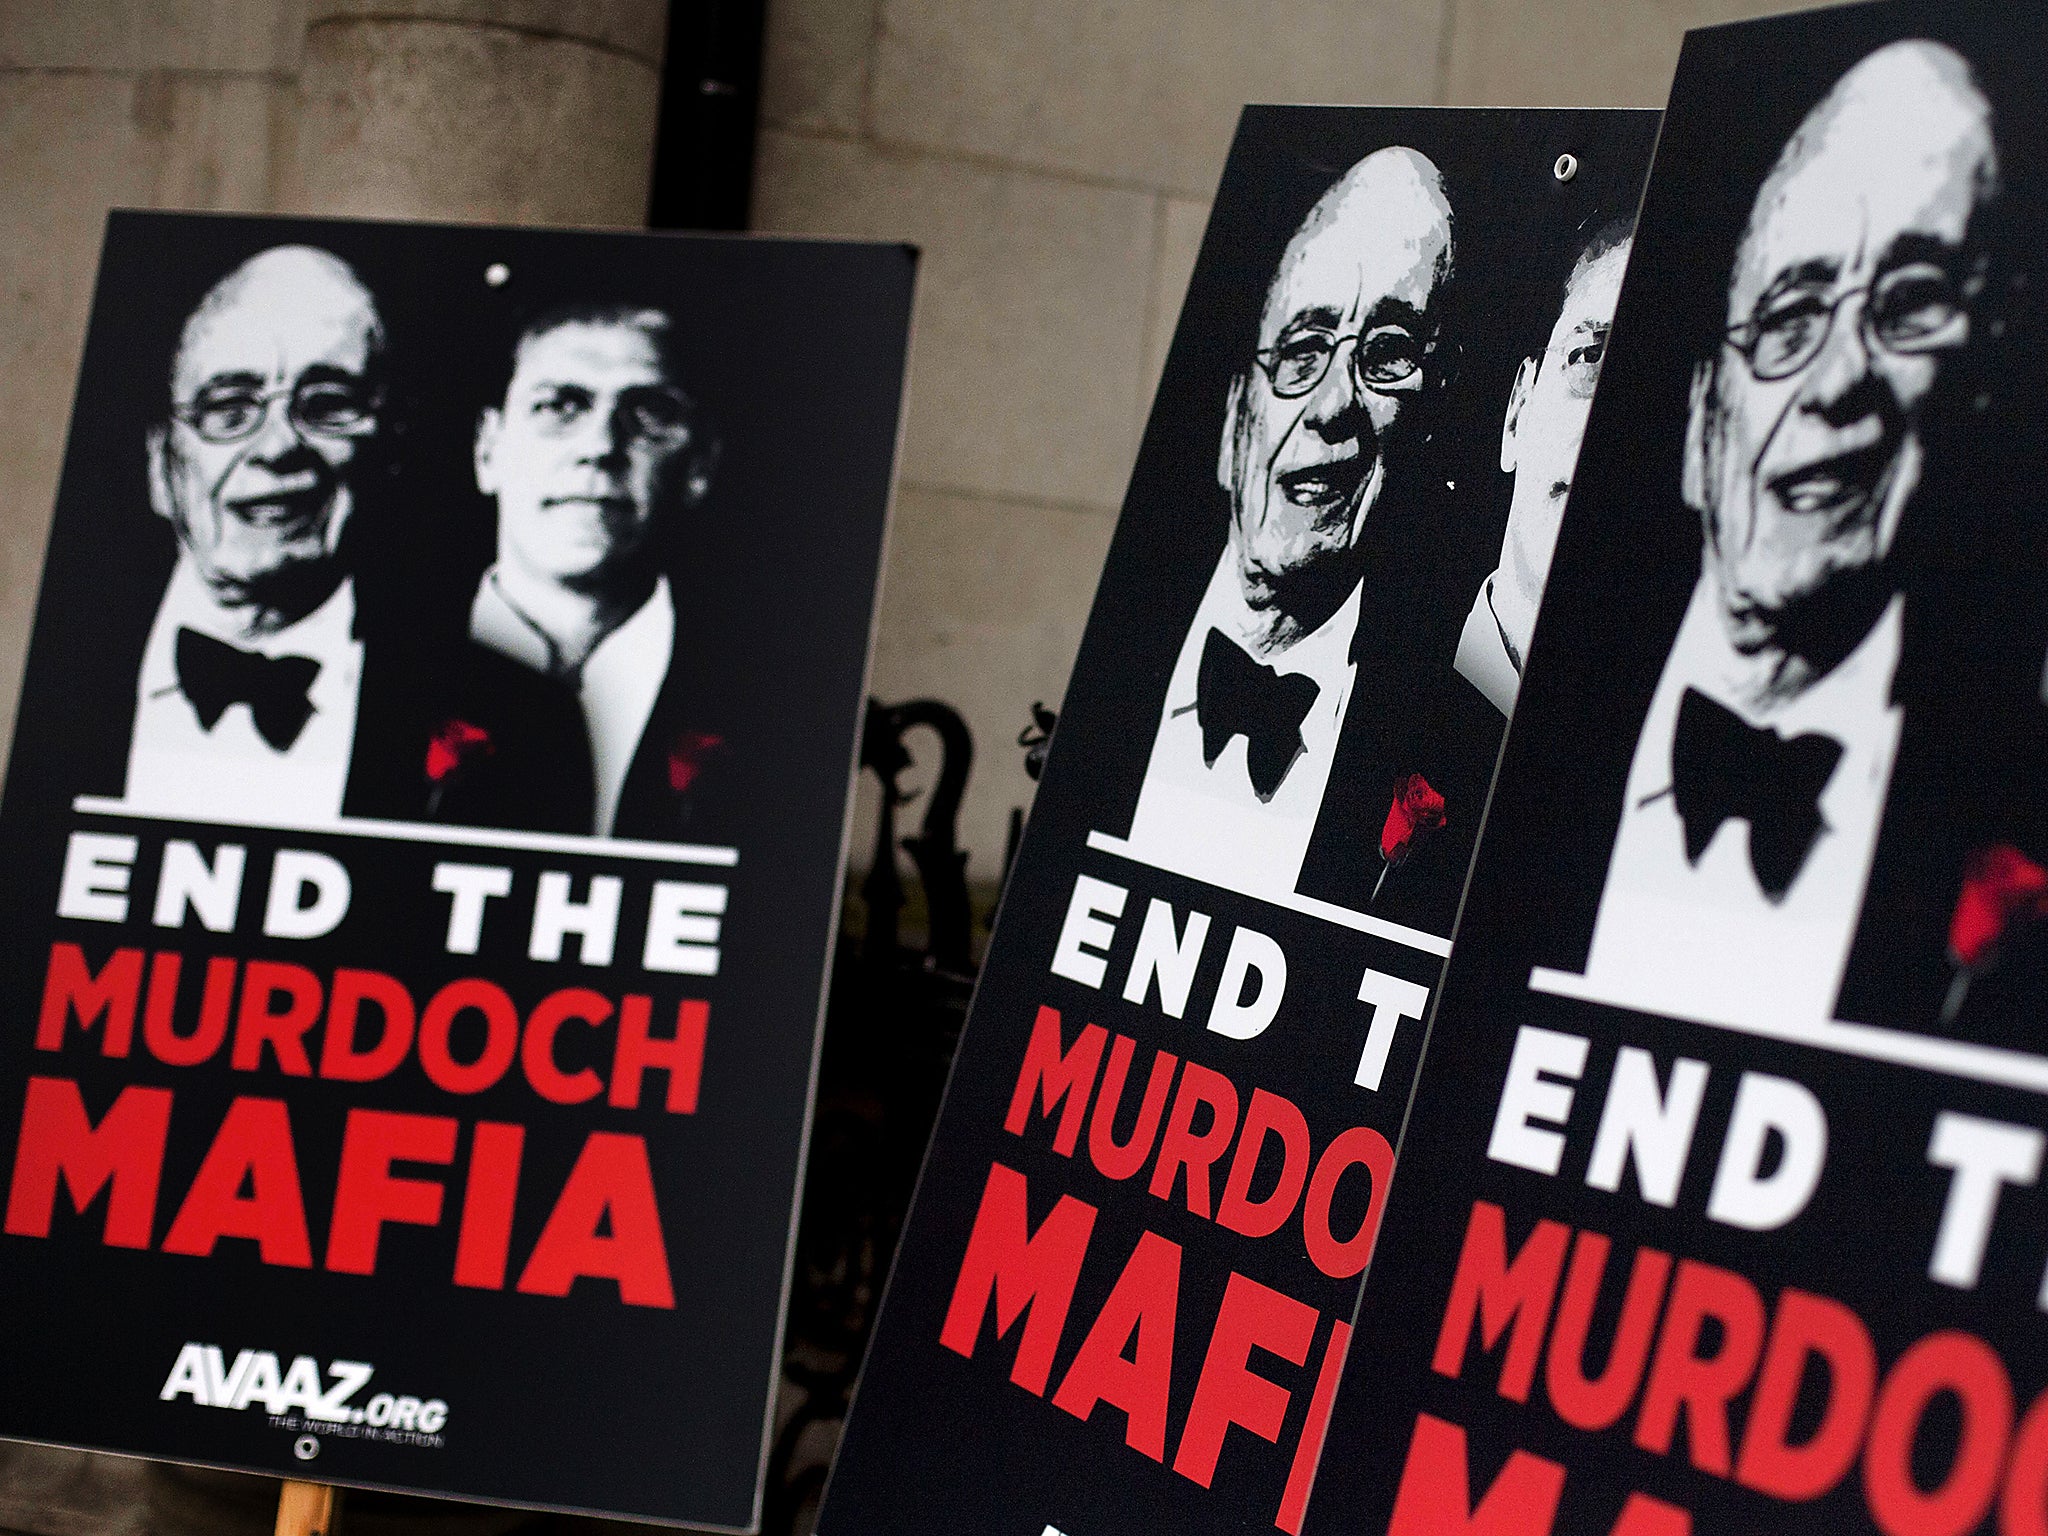 Many commentators have argued that the Murdoch media empire has excessive power